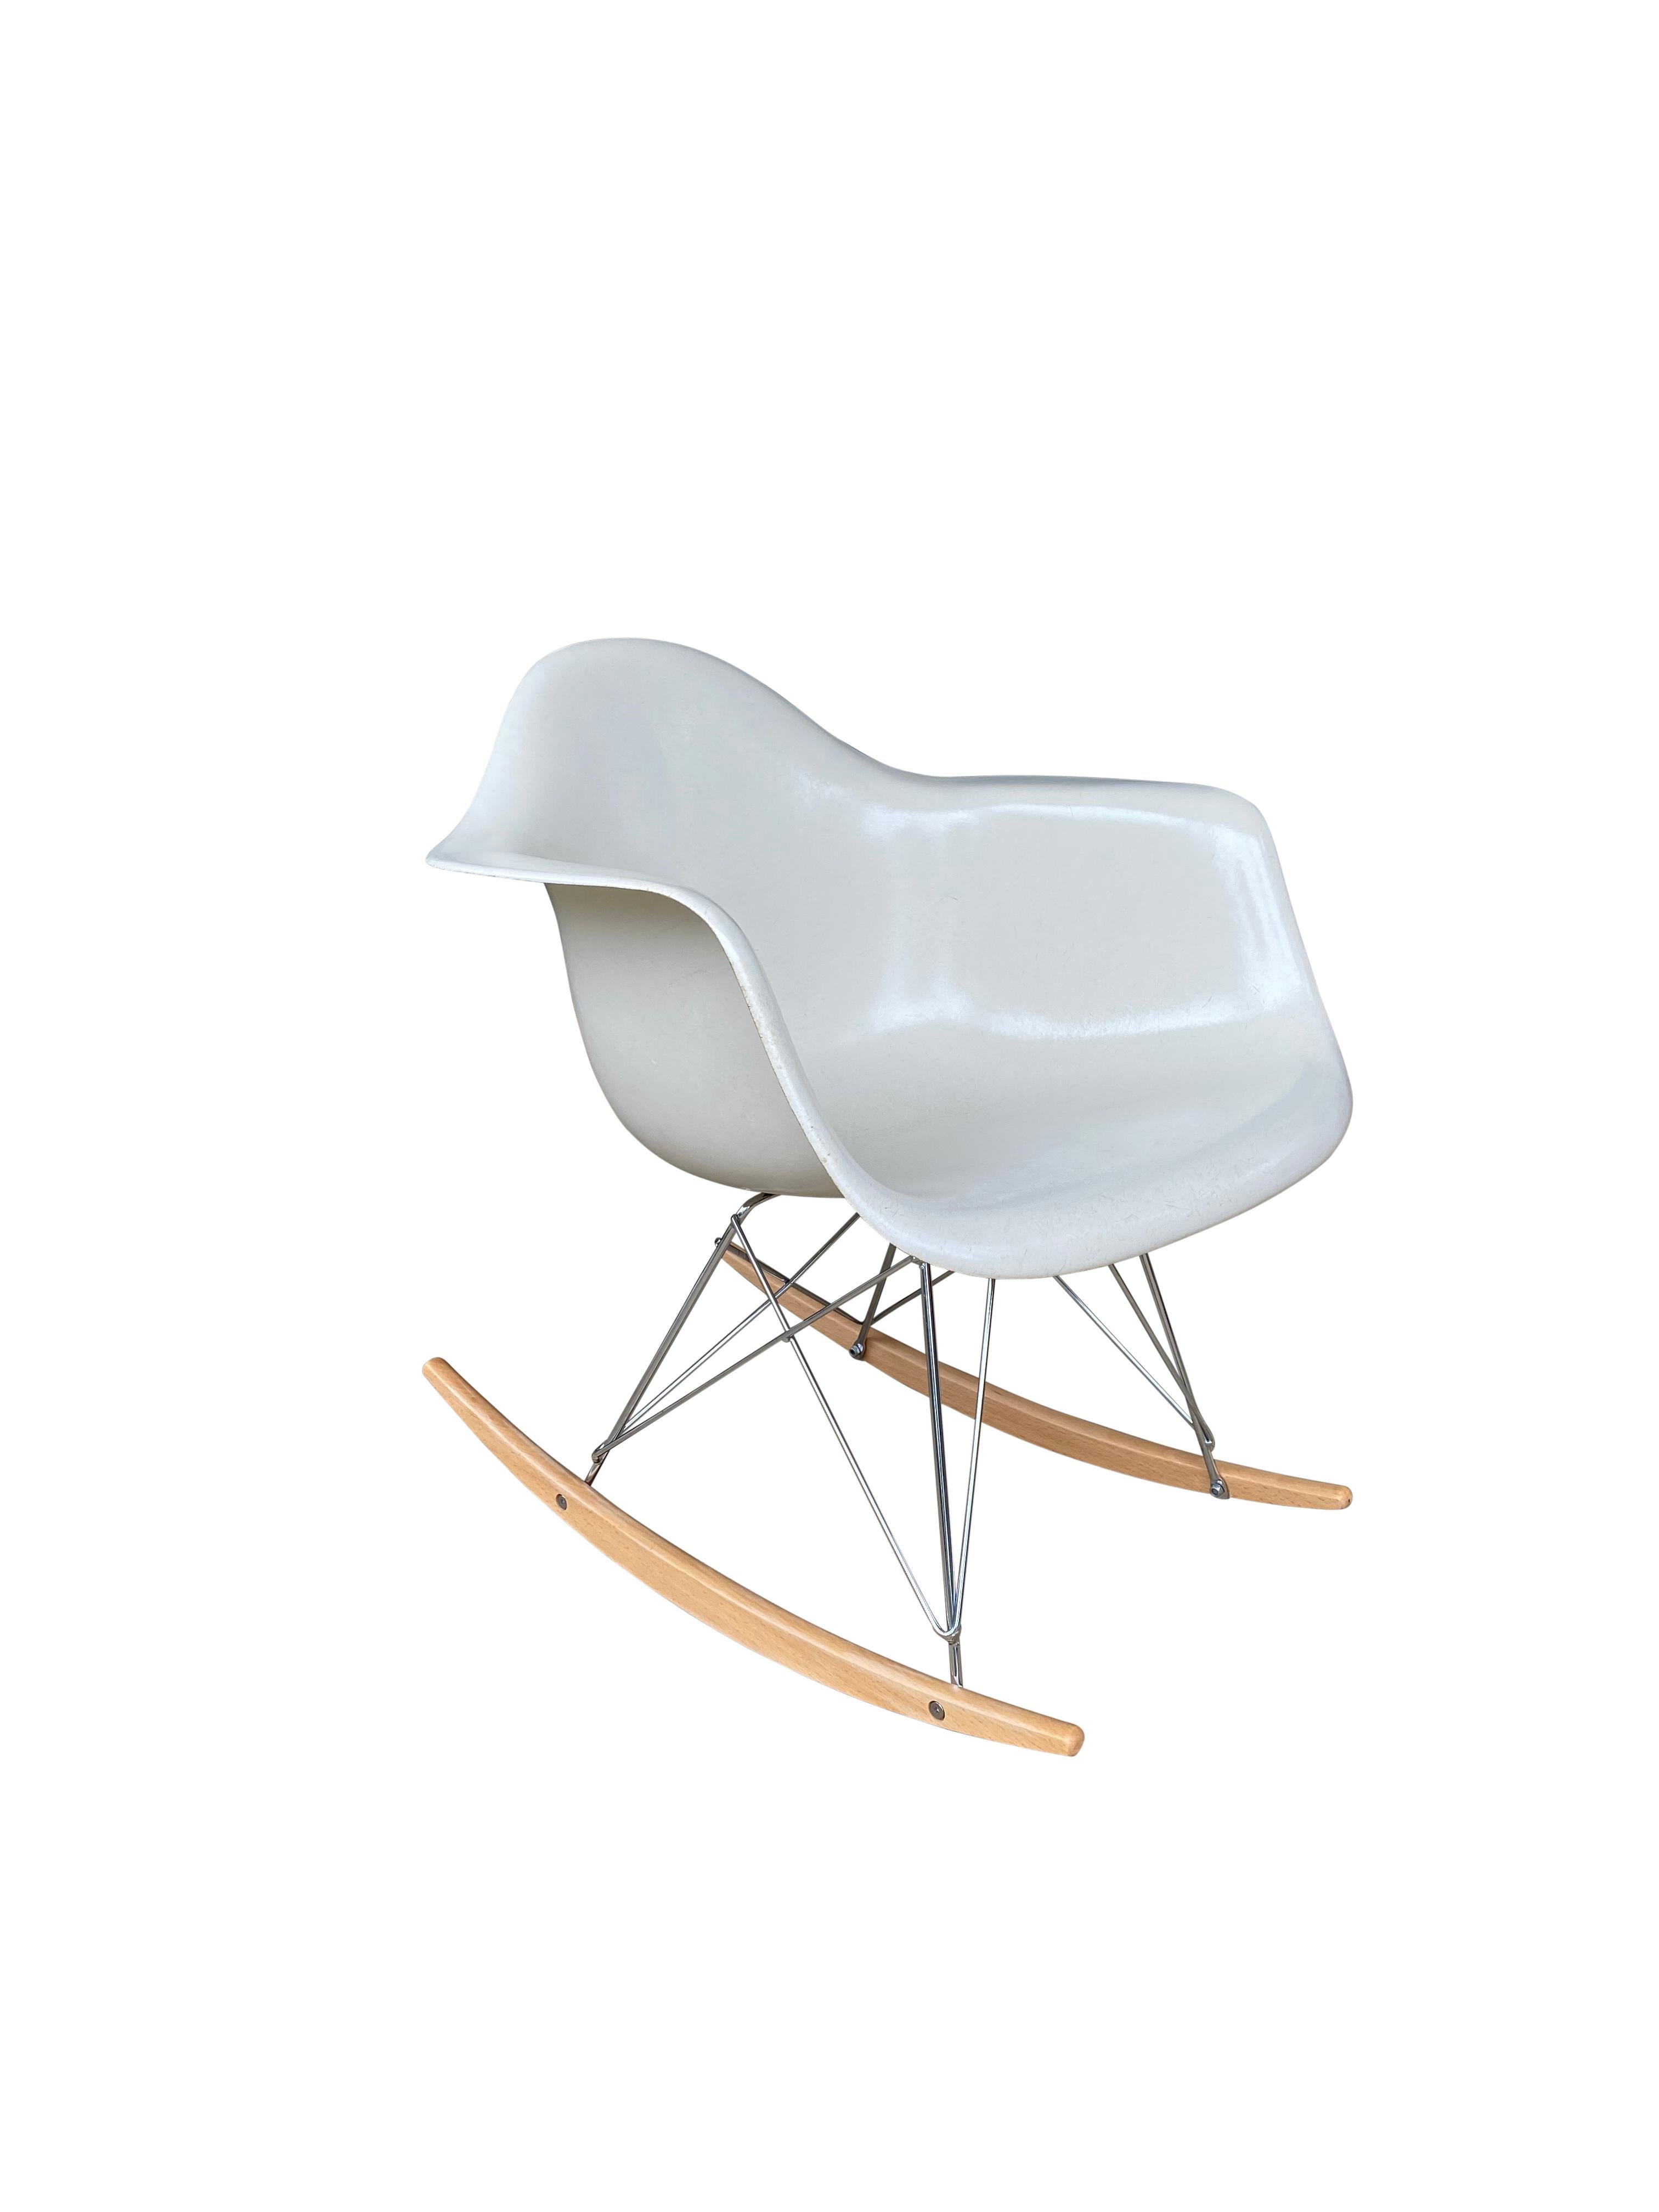 Gorgeous edition of the design classics model RAR rocking chair by Charles and Ray Eames and manufactured by Herman Miller. Clean parchment shell with even color and no cracks or holes. Signed Herman Miller and guaranteed authentic. Newer base in